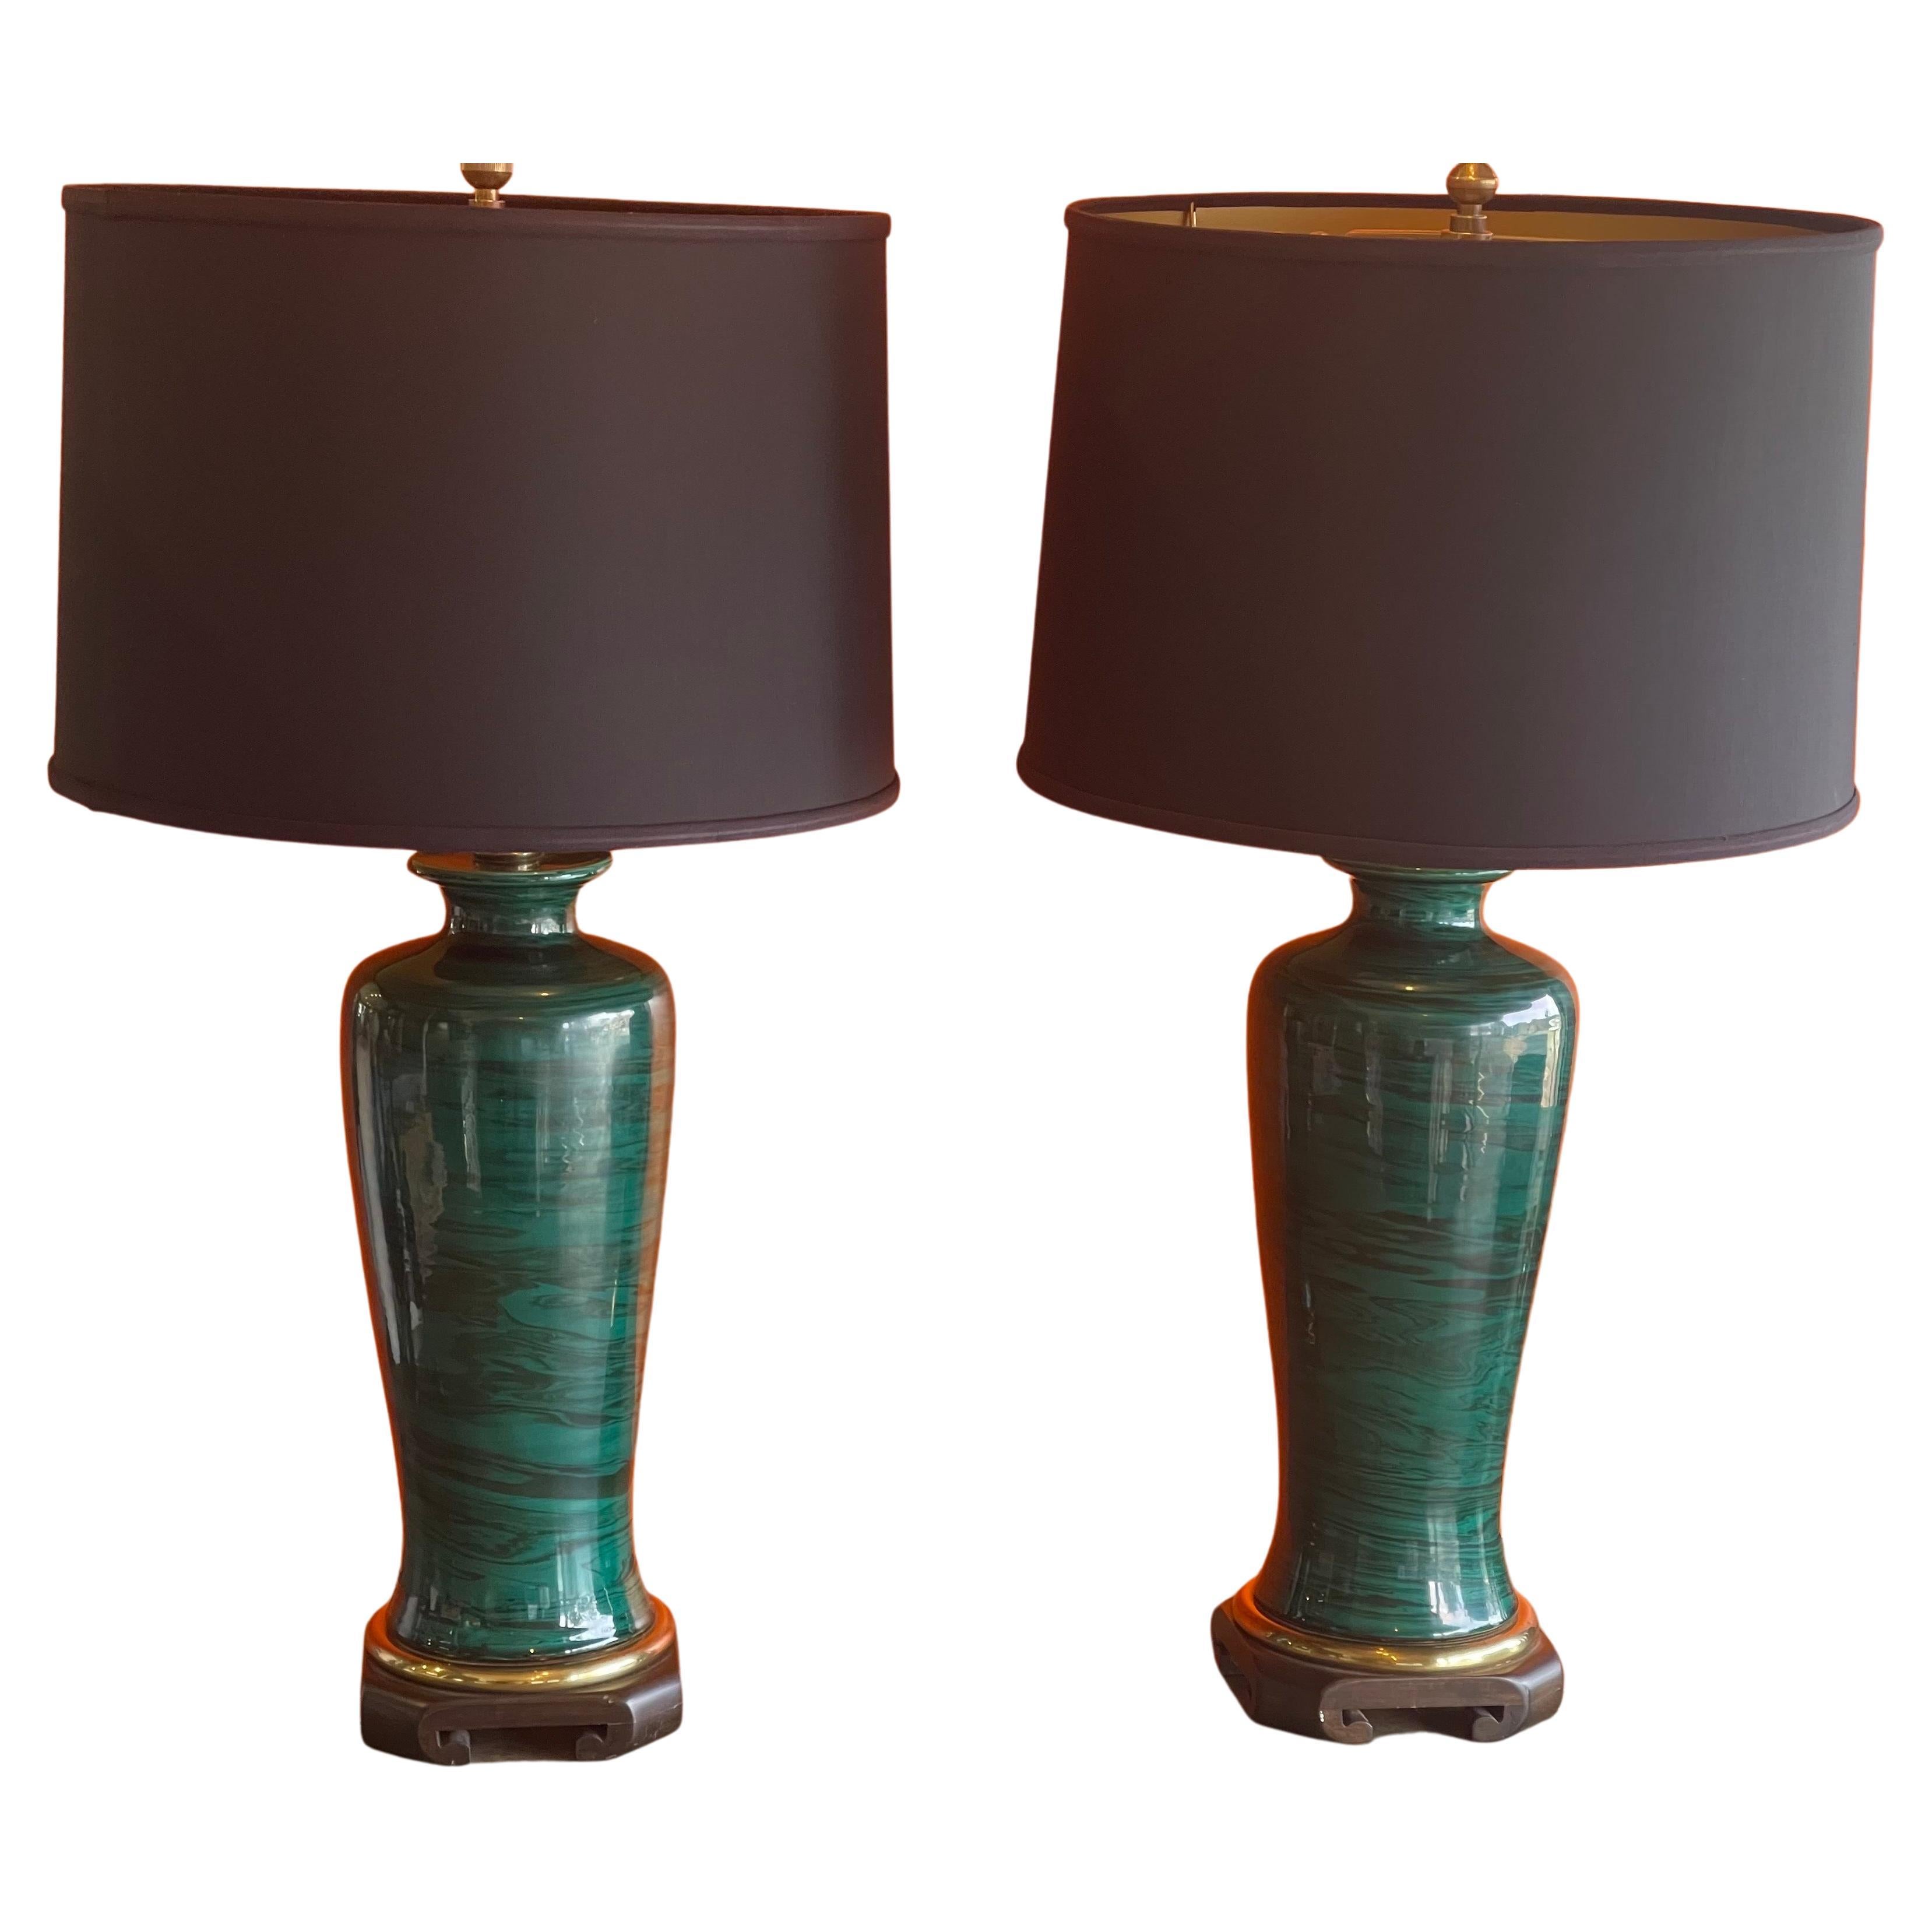 Pair of Faux Malachite Table Lamps by Frederick Cooper Lamp Co. For Sale